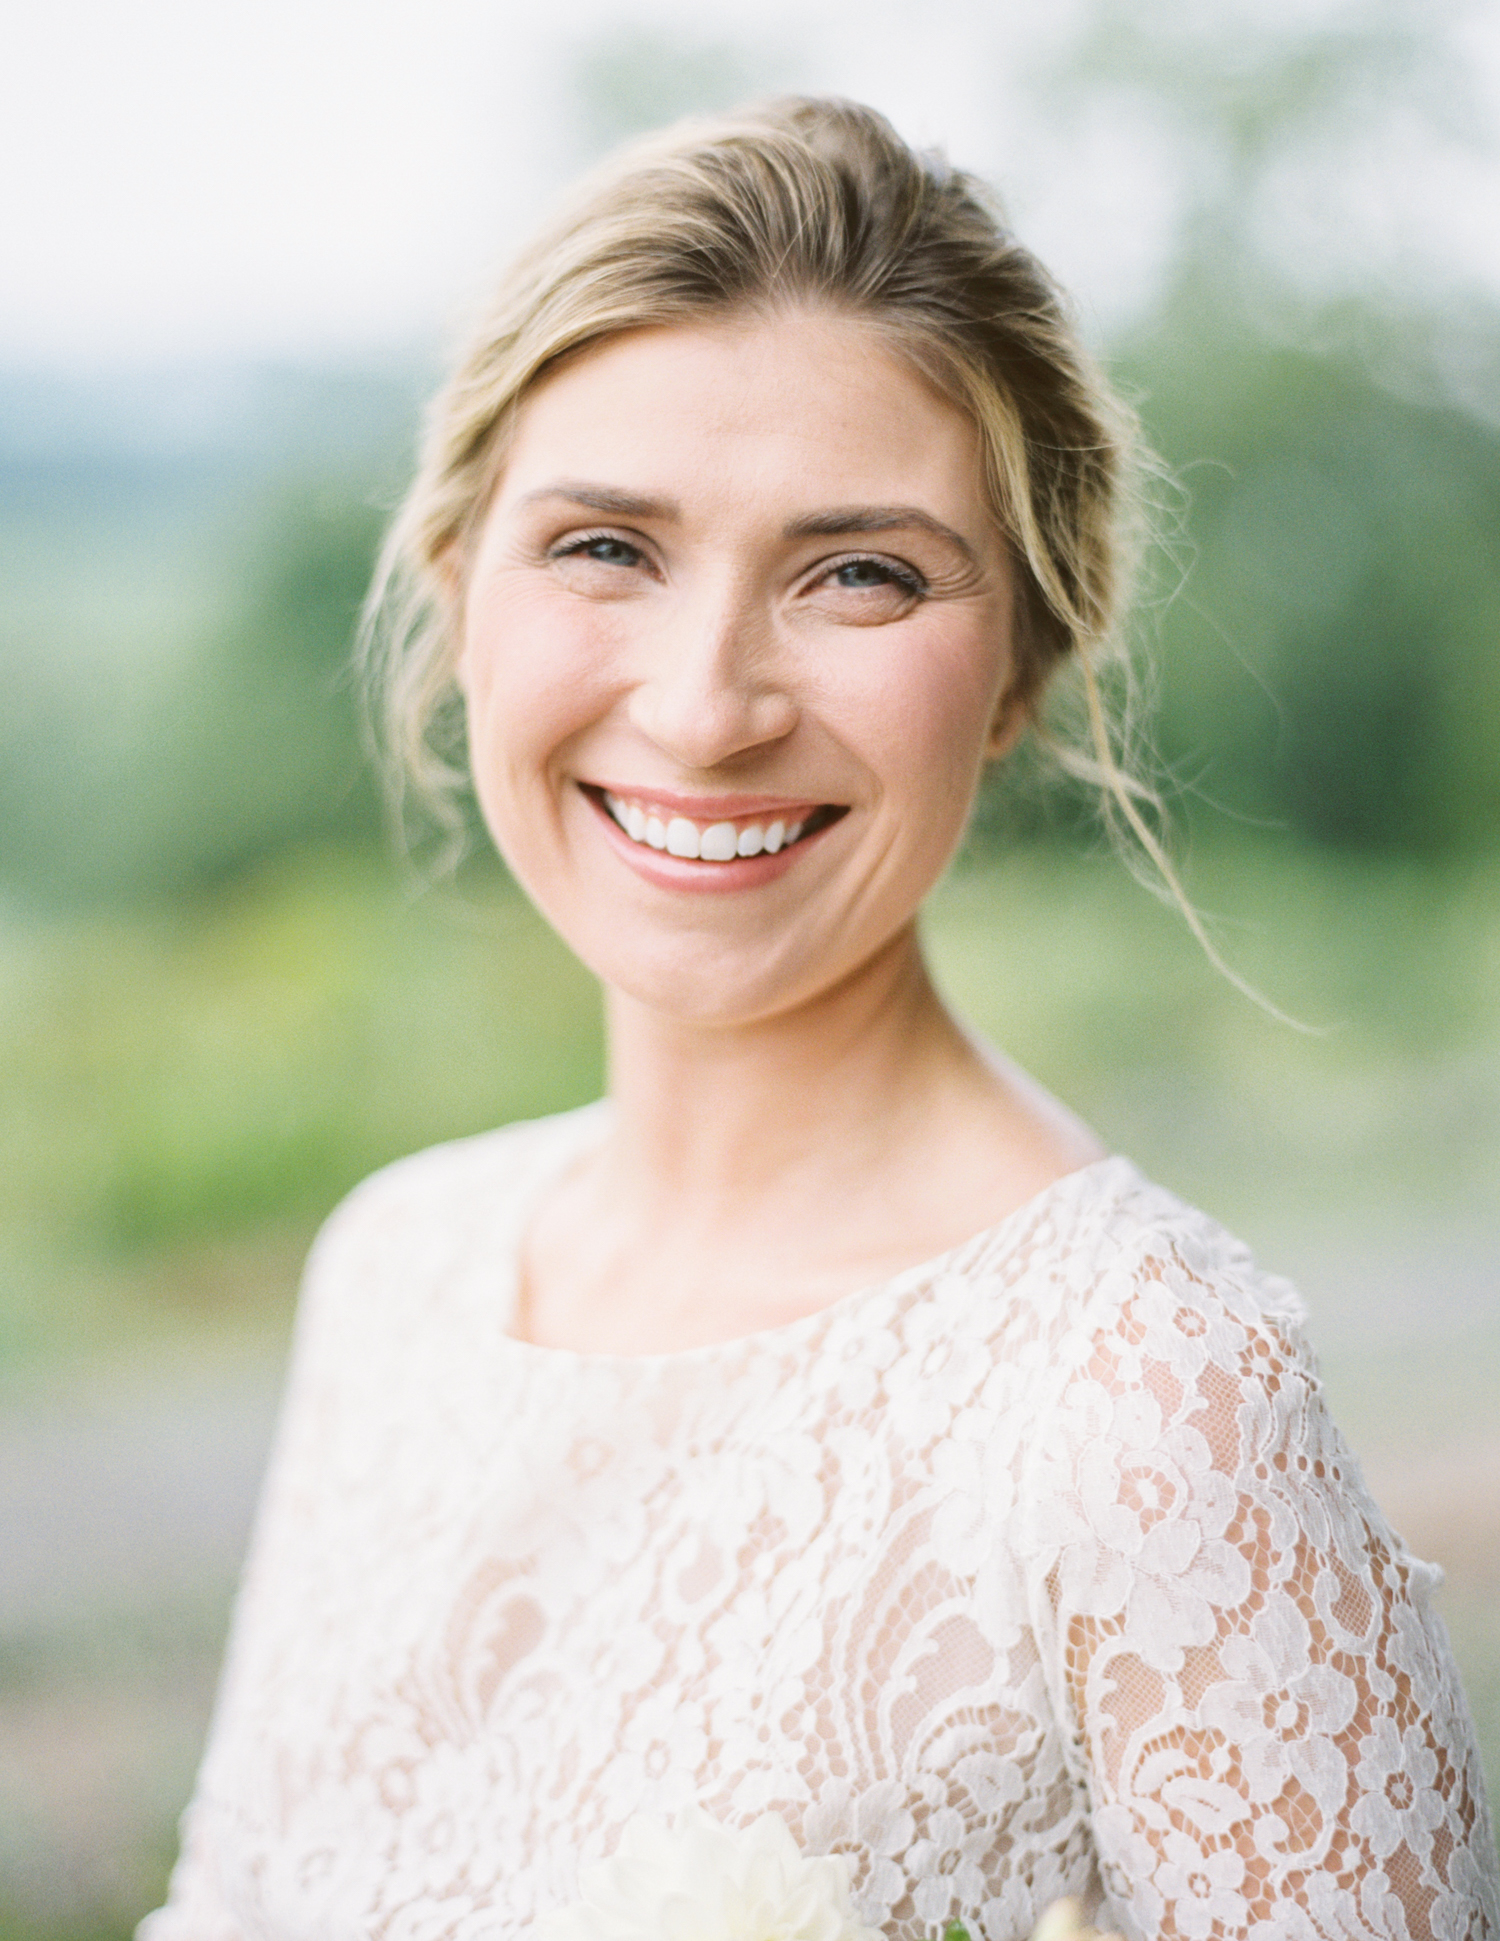 Pippin Hill Wedding Photos | Molly Carr Photography | Lauren Emerson Events | Pippin Hill Farm & Vineyard | Rime Arodaky Bride | Bride with Hair Up | Long Sleeve Lace Wedding Dress | Smiling Bride